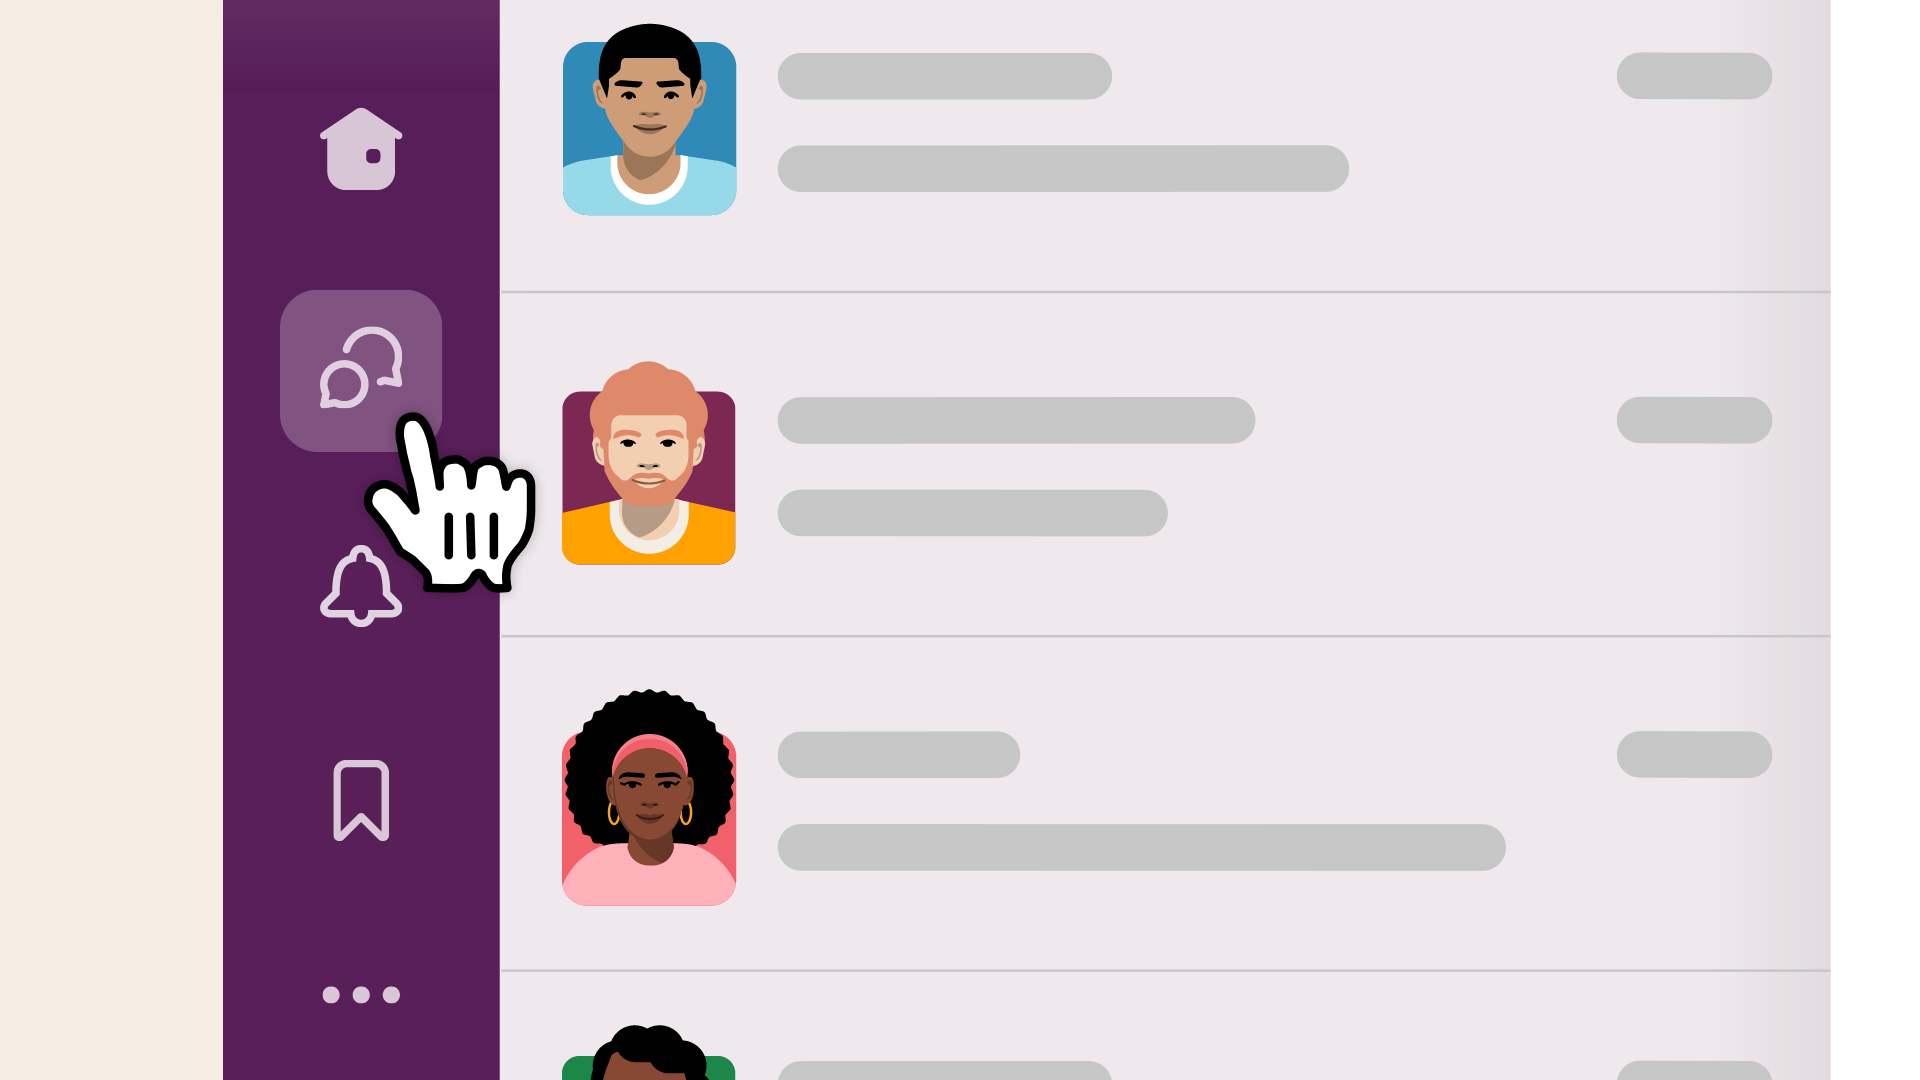 View to see all your direct messages in Slack